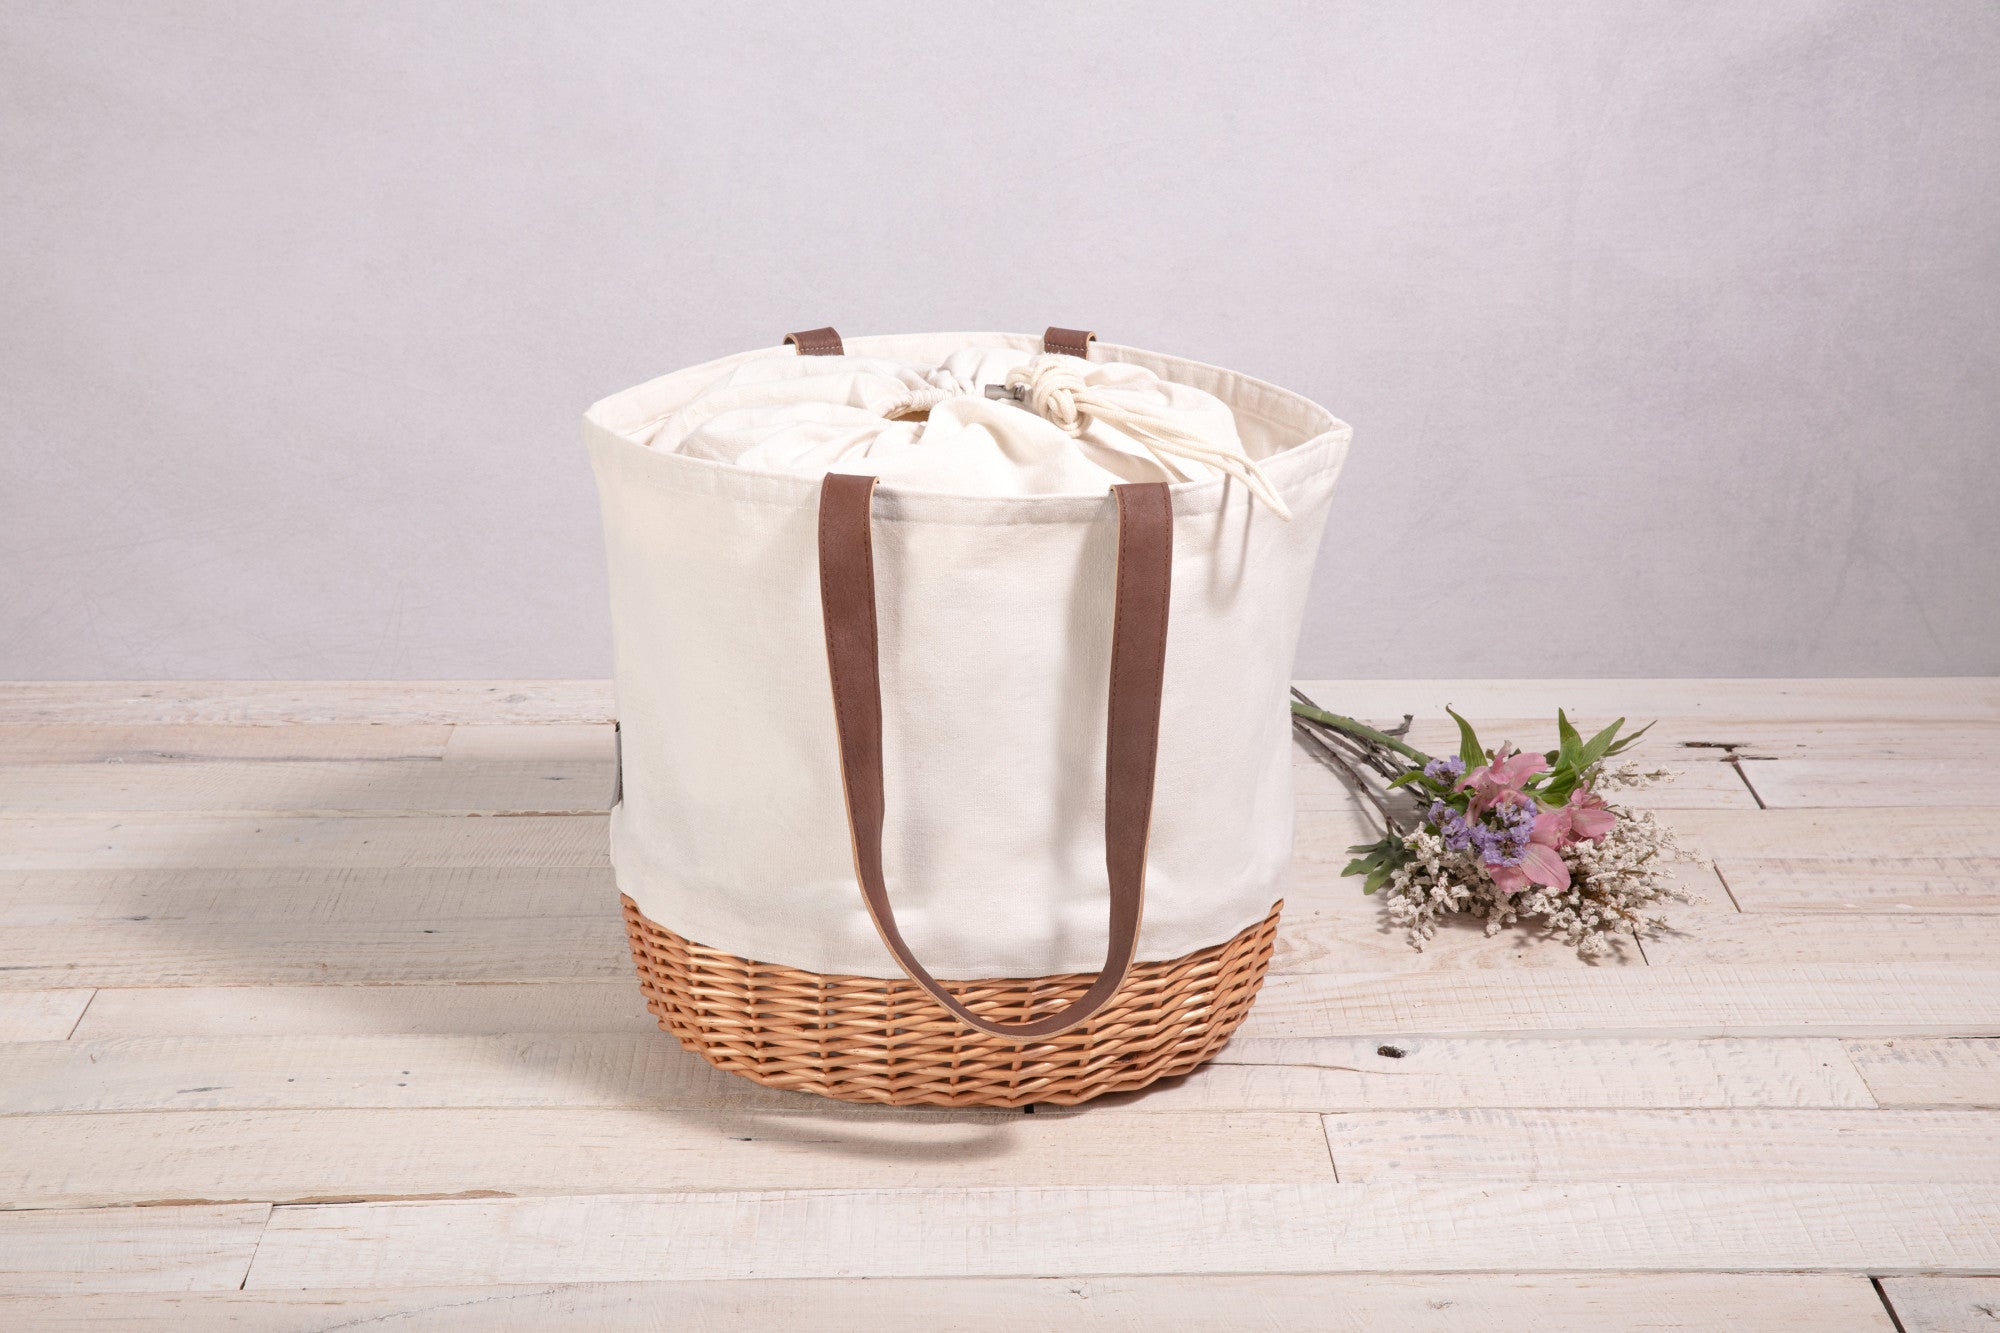 UP - Coronado Canvas and Willow Basket Tote